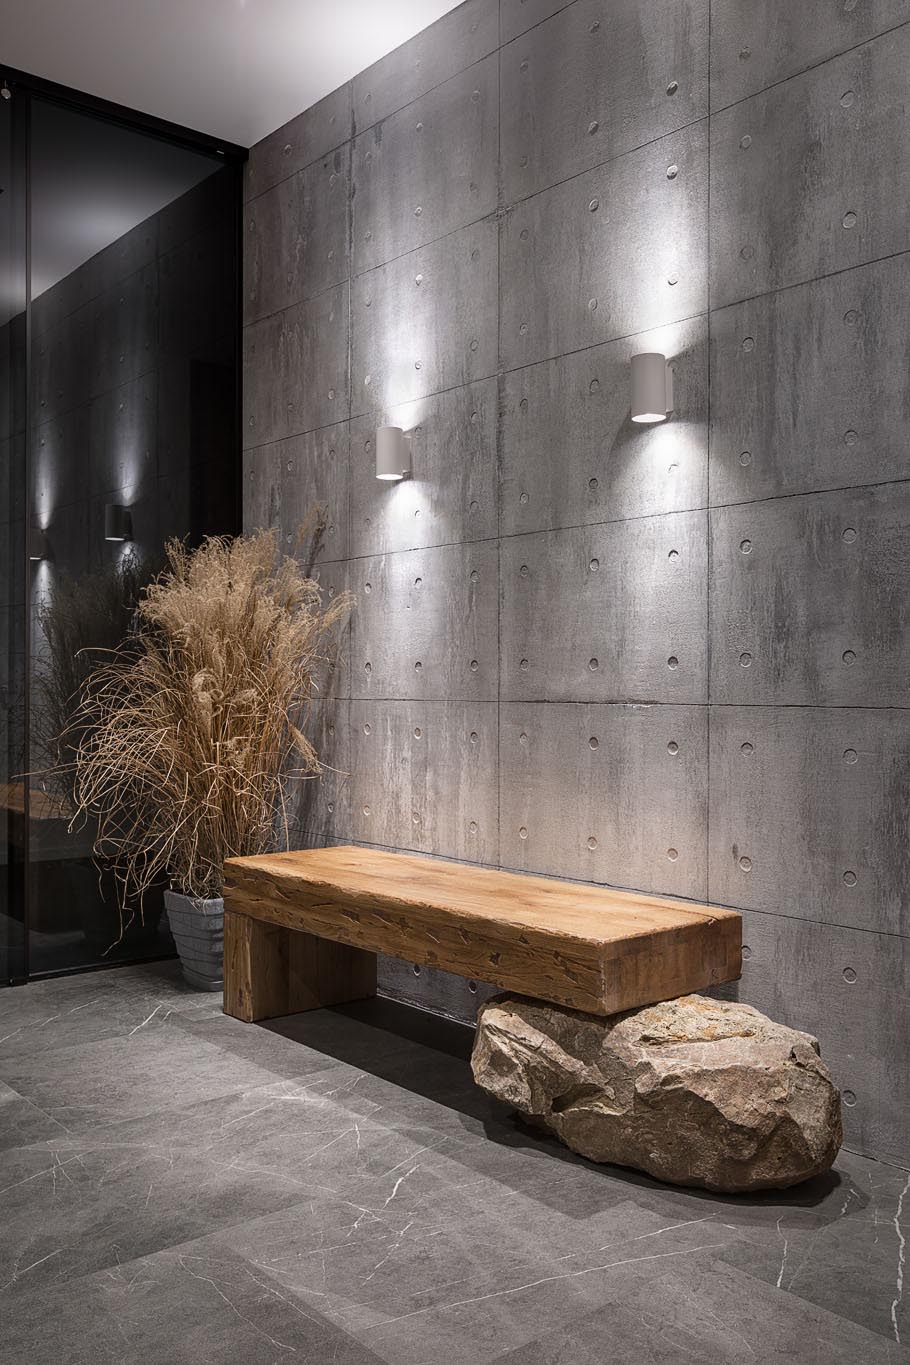 This modern entryway has an exposed concrete wall highlighted by two wall scones, and features a wood bench that rests on a boulder.